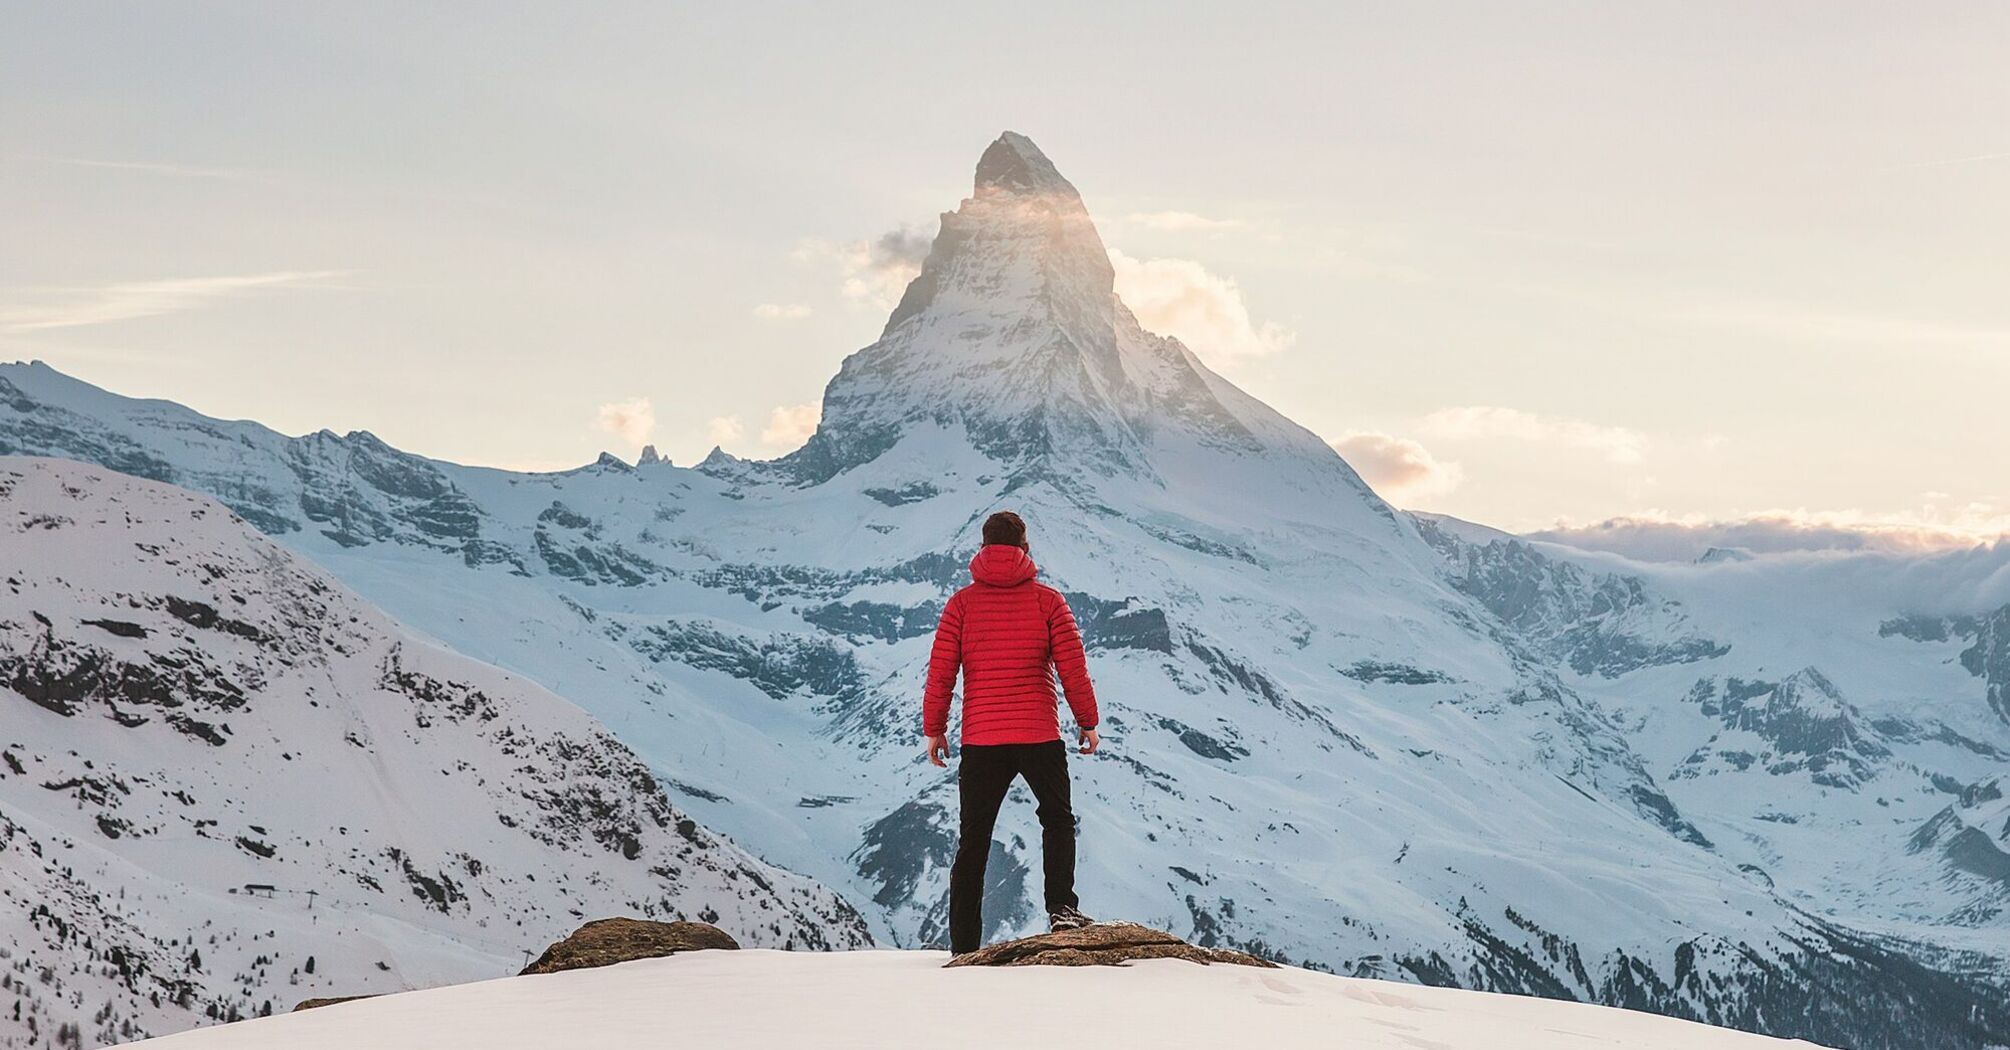 A person in a red jacket standing on a snowy mountain, gazing at a distant peak